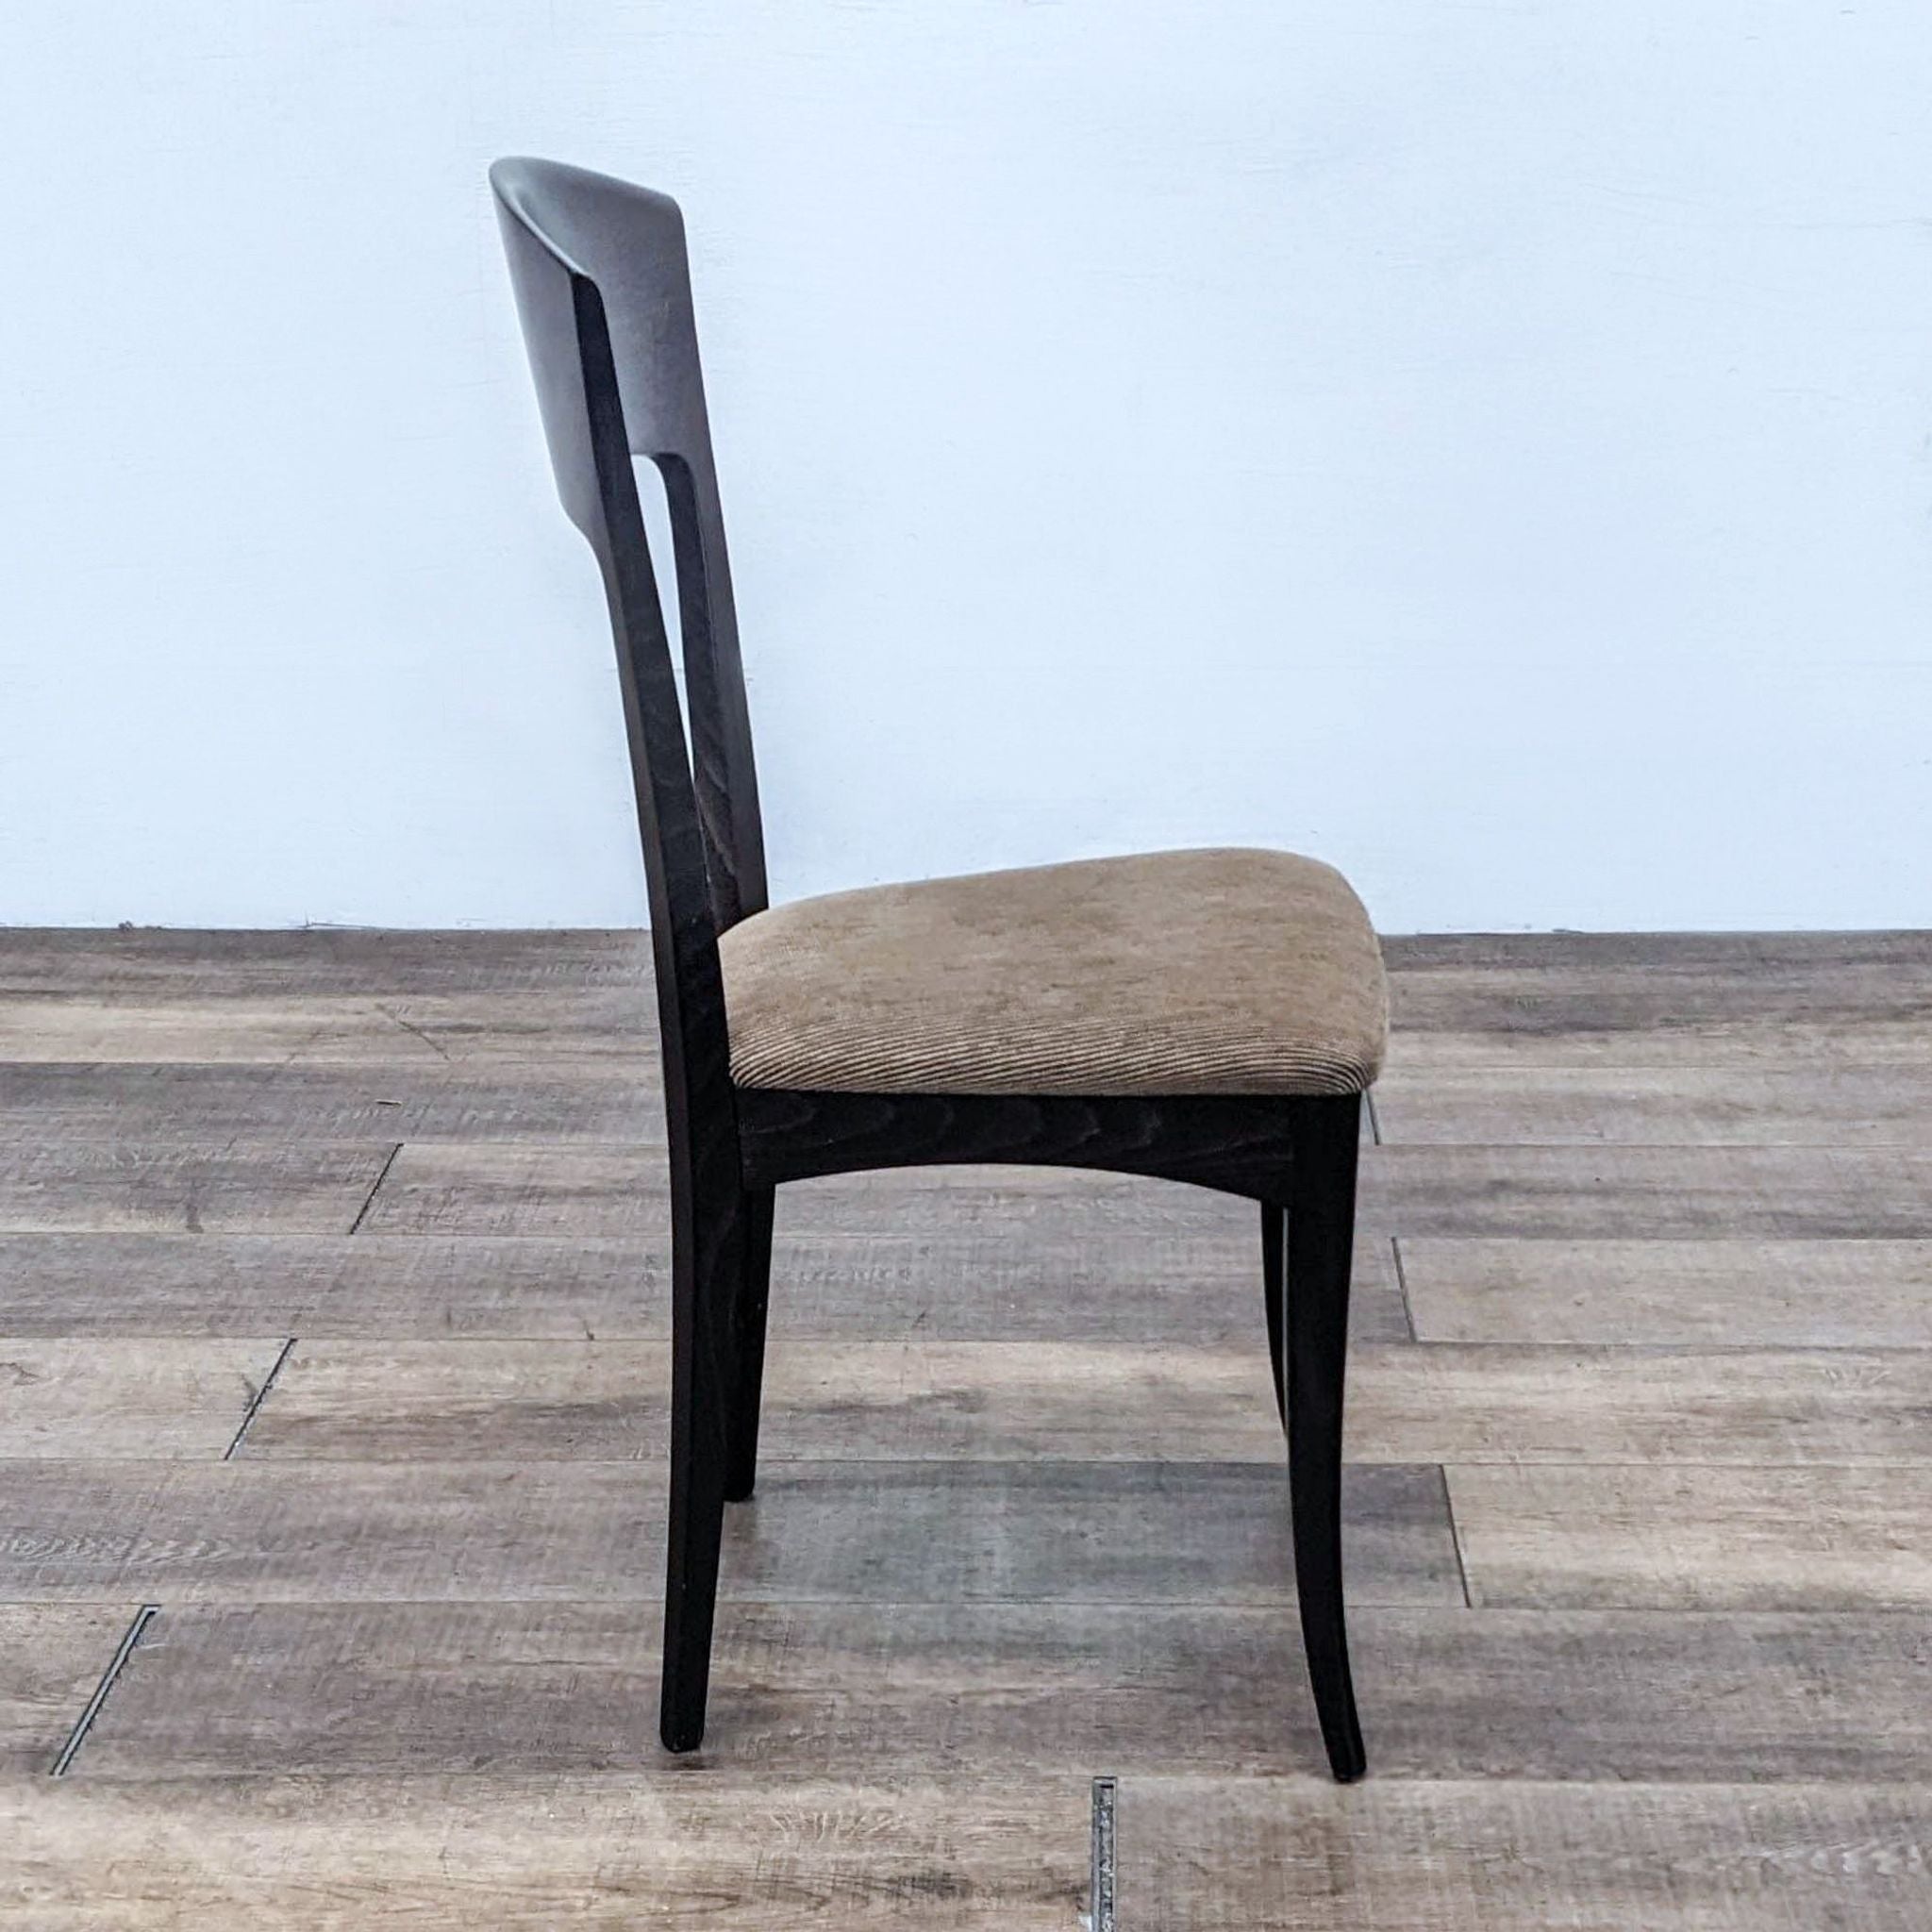 Alt text: A sculpted teak Italian dining chair by A. Sibau with black wood grain frame and beige upholstery, part of a Domitalia Sibau dining set.